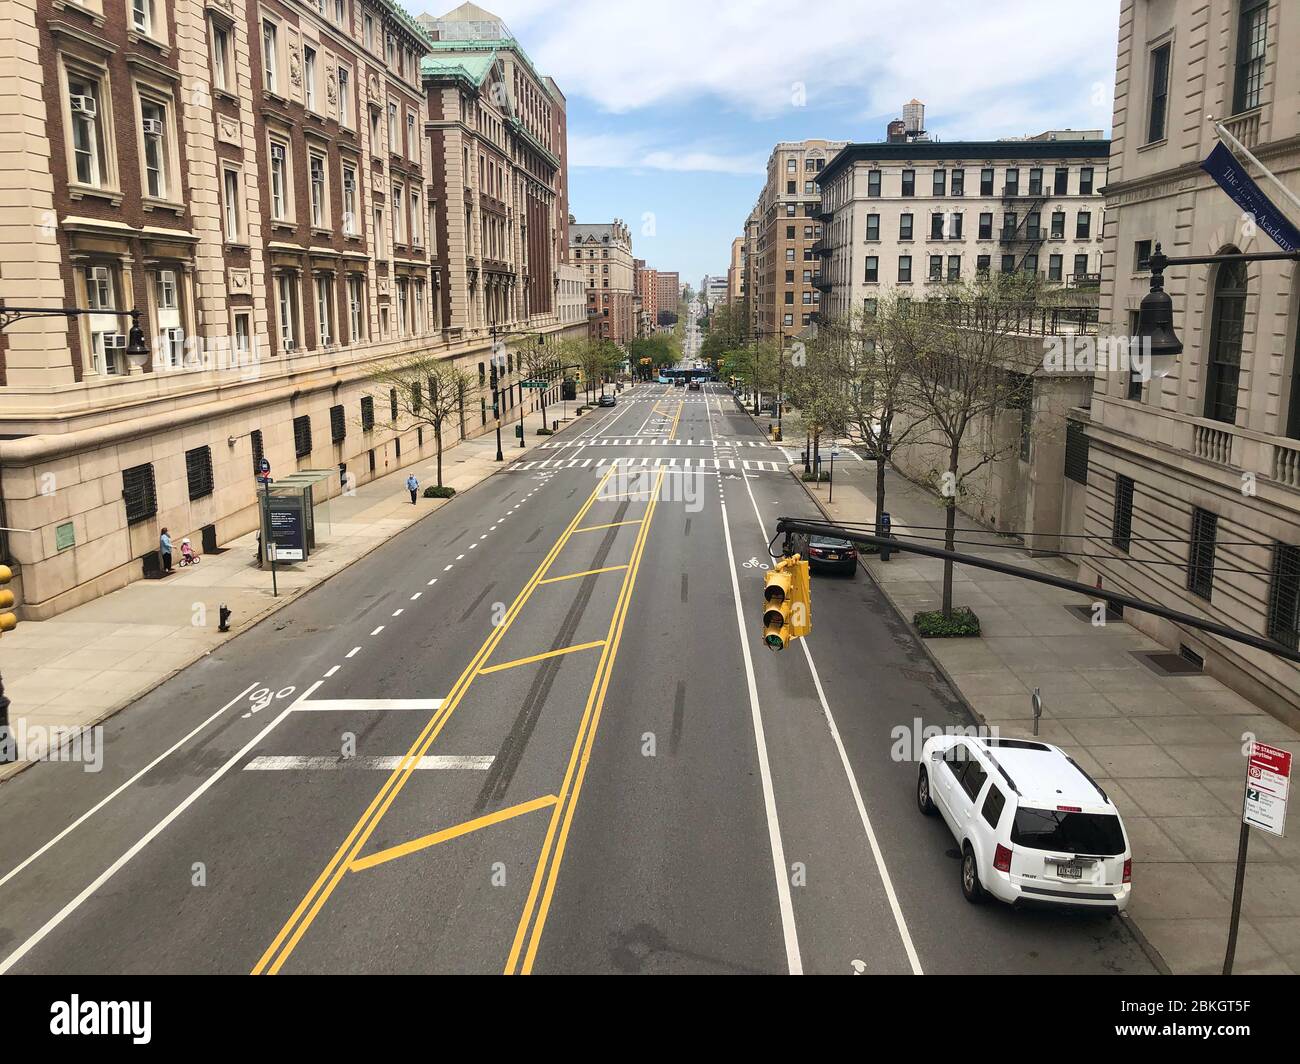 New York, USA, May 2020,  Overview of Amsterdam Avenue seen from Columbia University during the Coronavirsa lockdown resulting in quiet highways. Stock Photo